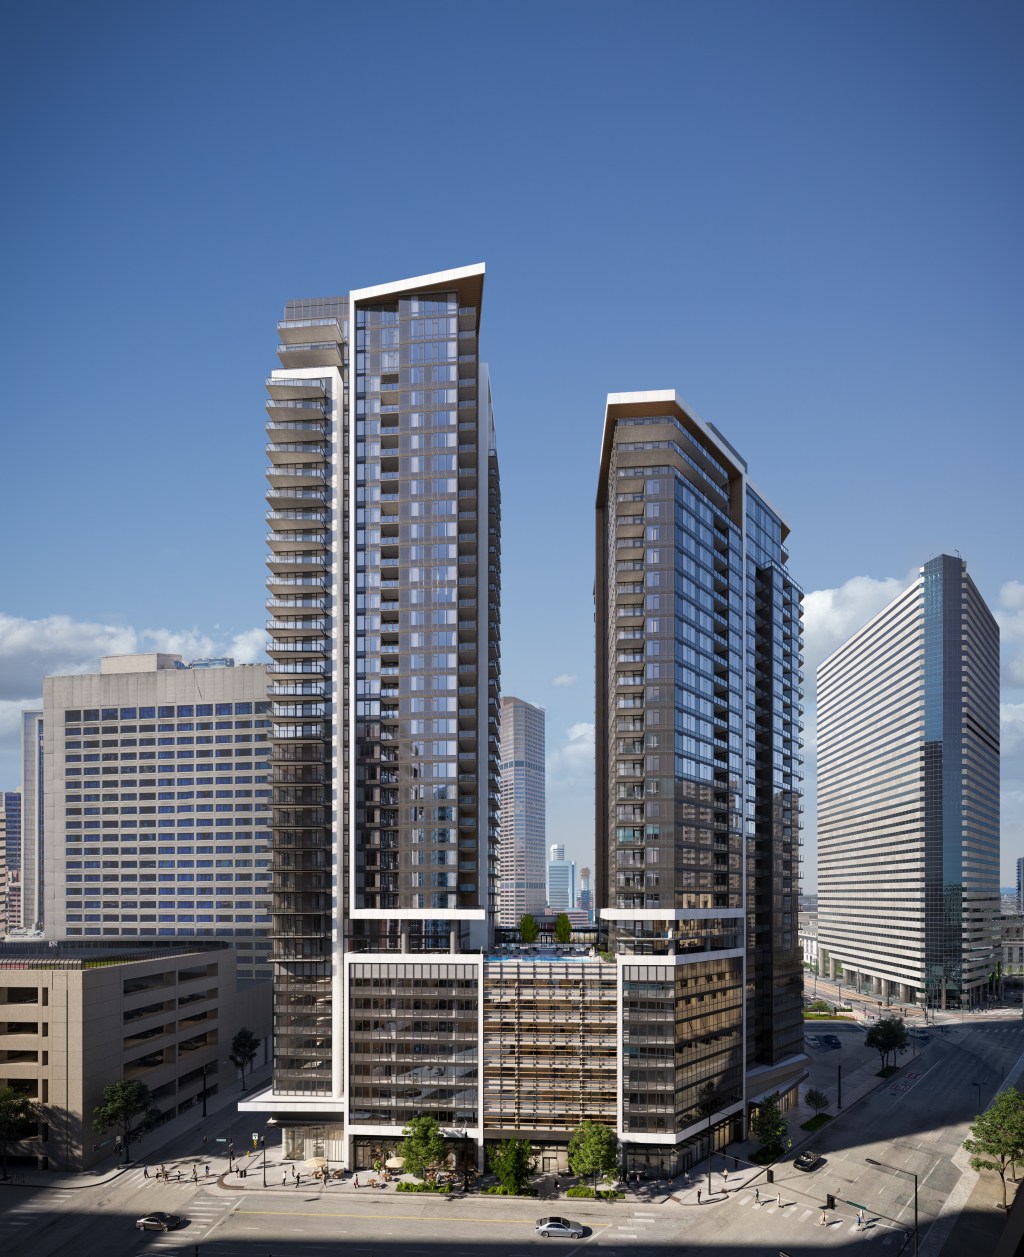 Canadian developer Amacon is calling the condo project Upton Residences in Denver